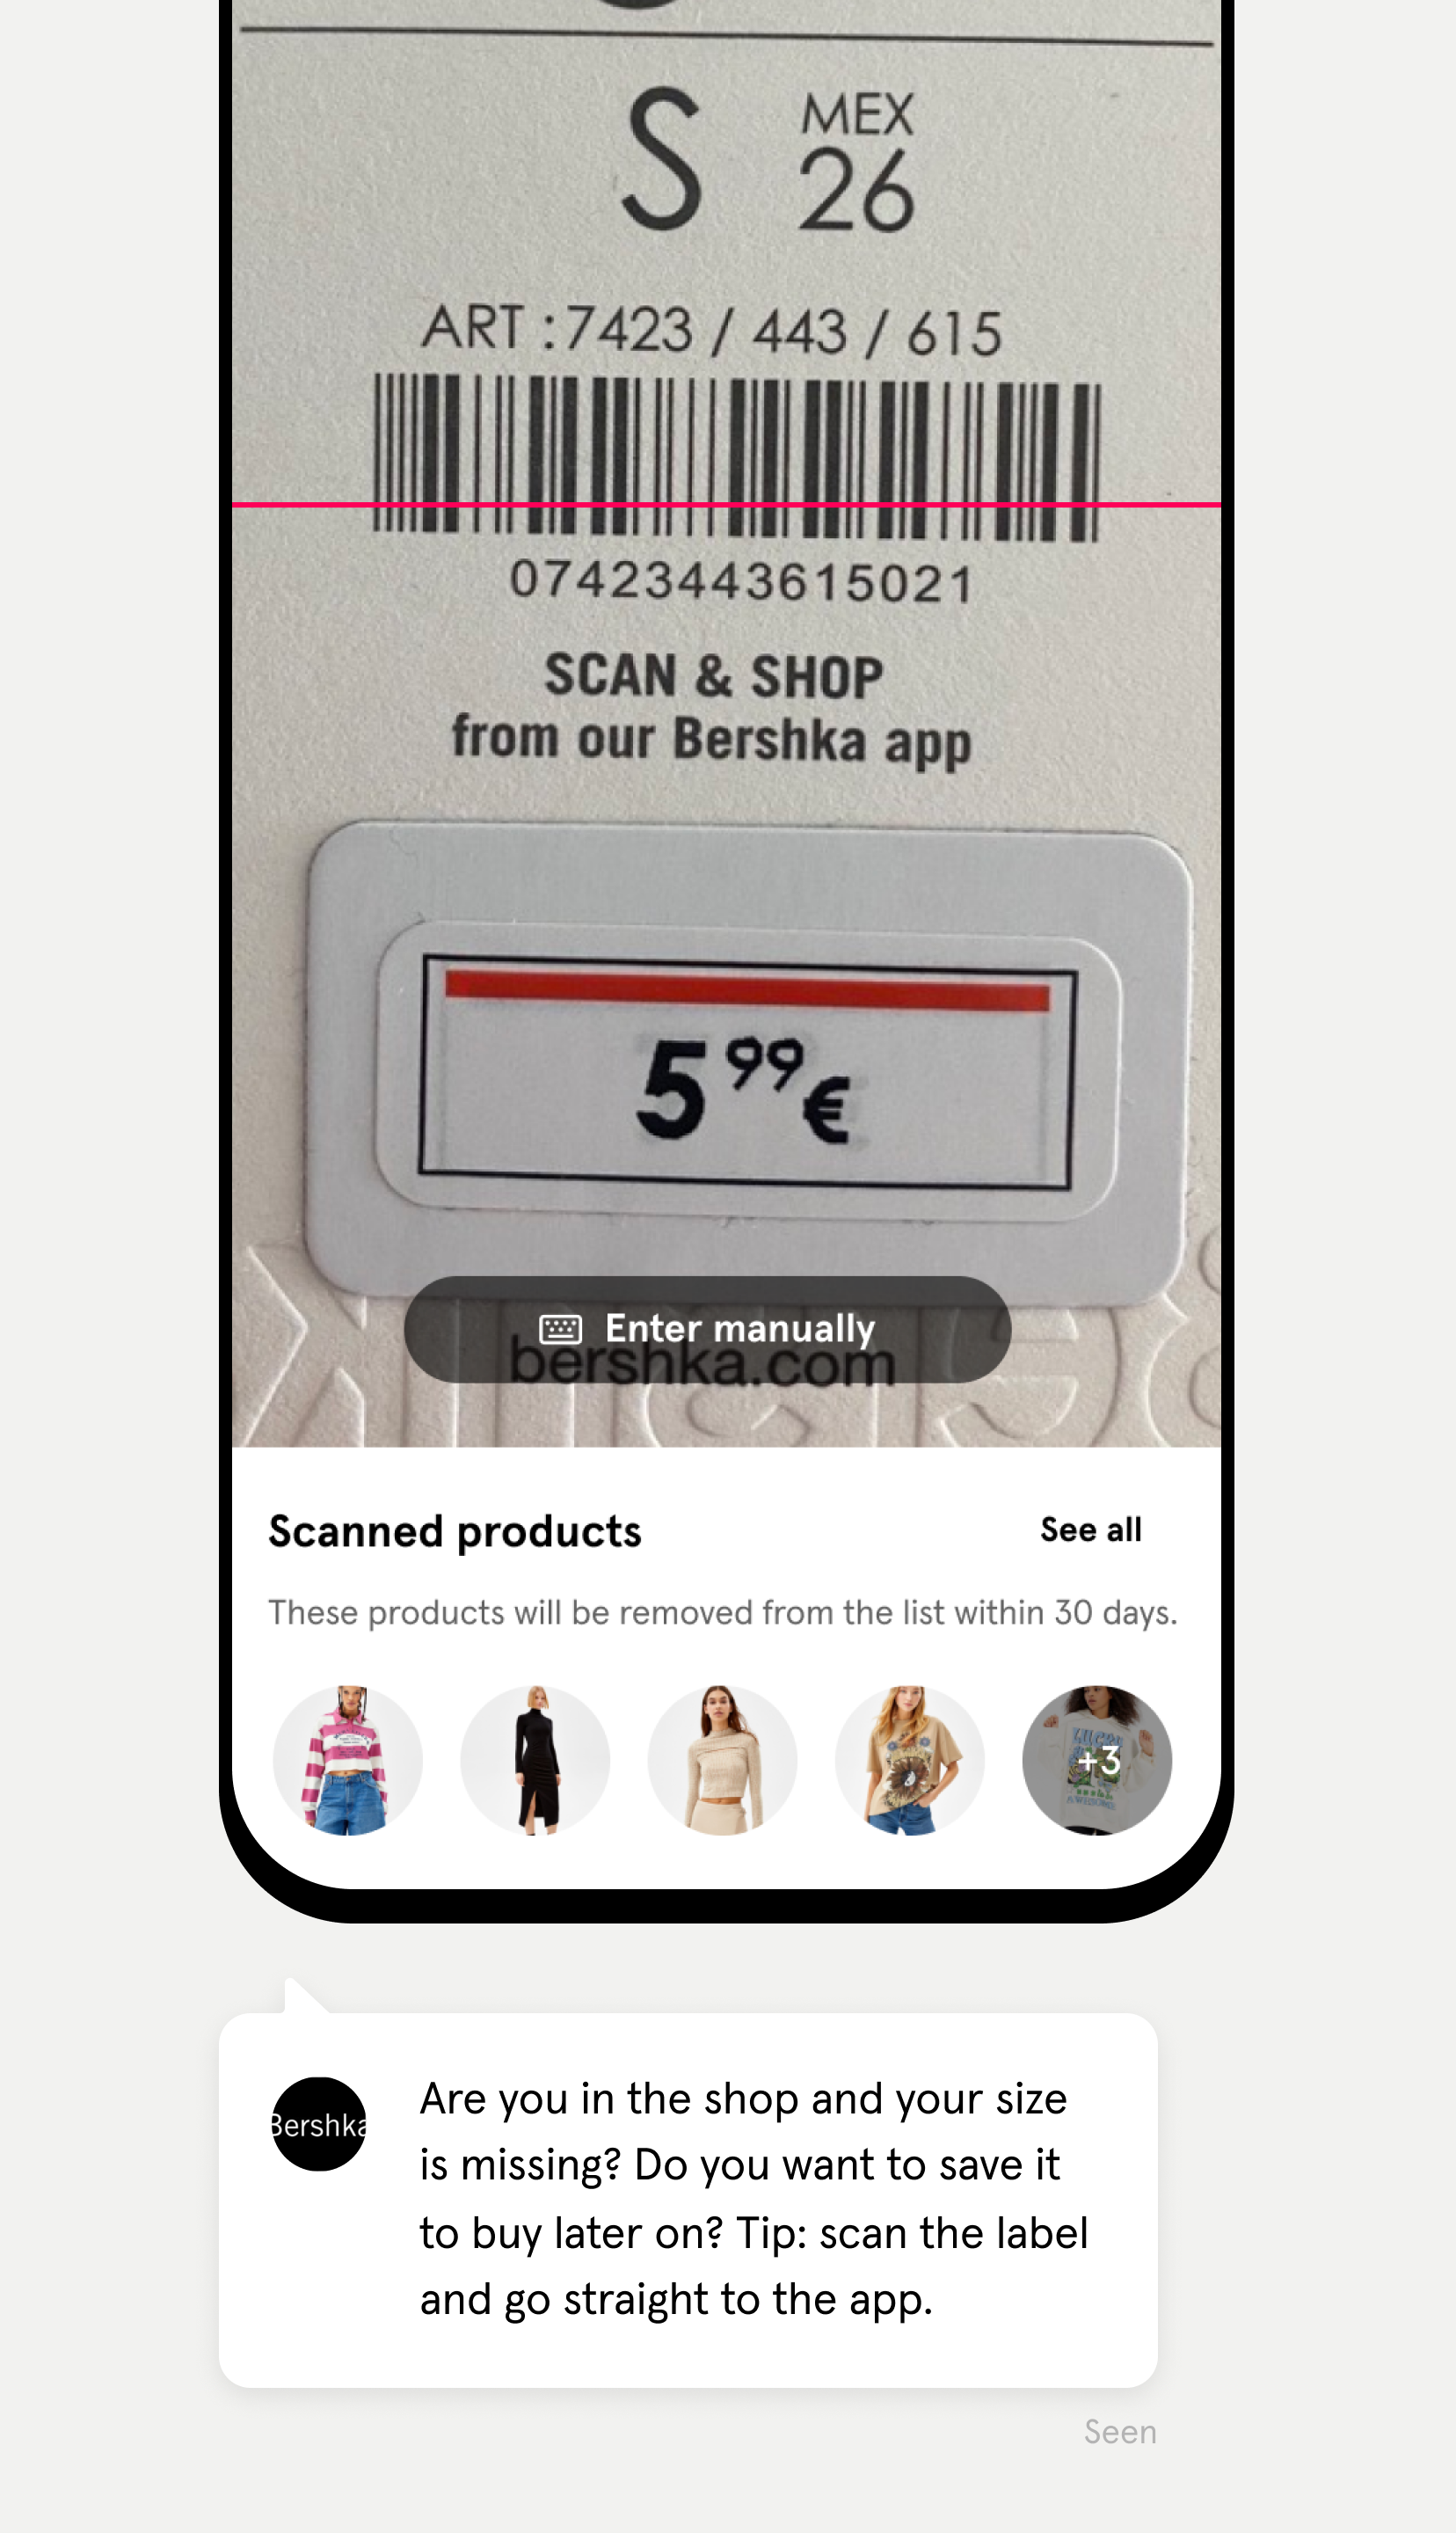 Bershka: Fashion & trends APK 2.79.0 for Android – Download Bershka:  Fashion & trends APK Latest Version from APKFab.com